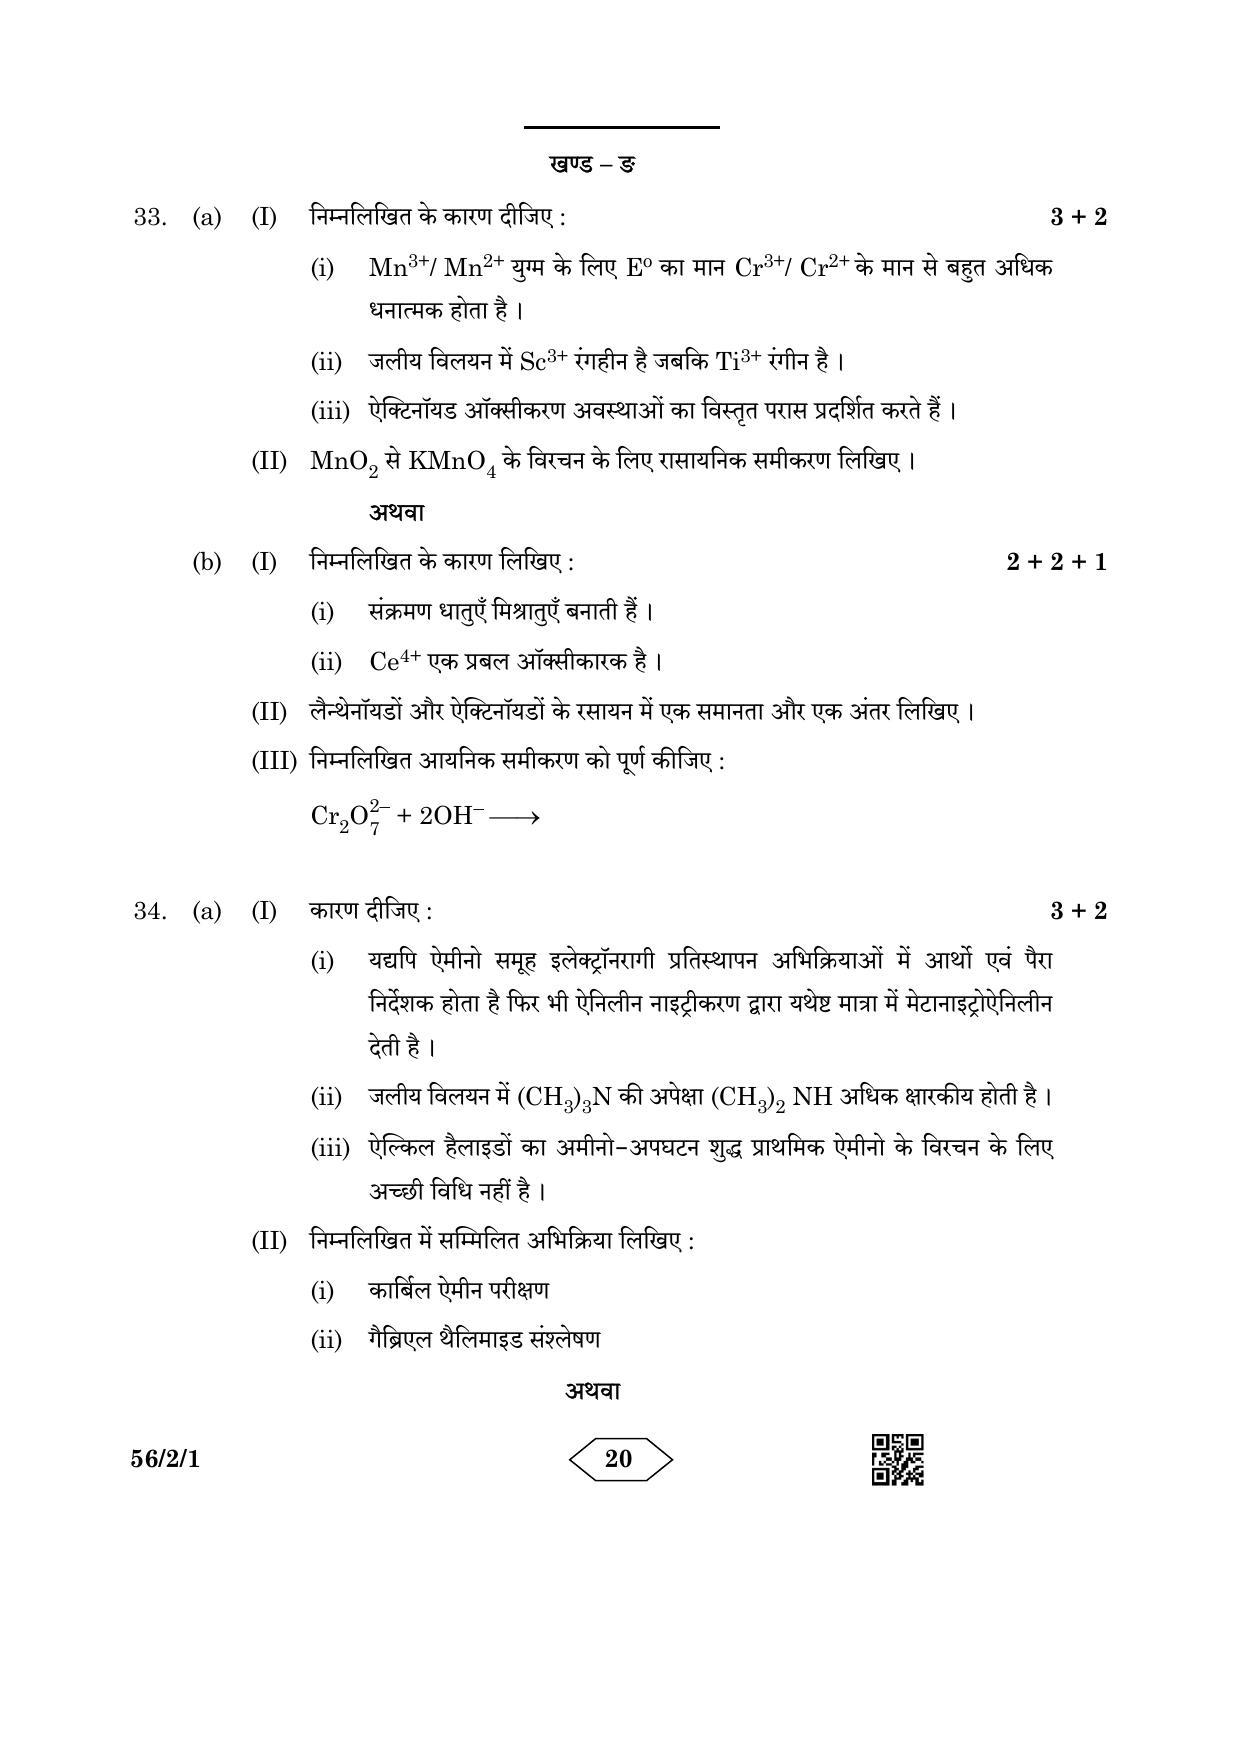 CBSE Class 12 56-2-1 Chemistry 2023 Question Paper - Page 20